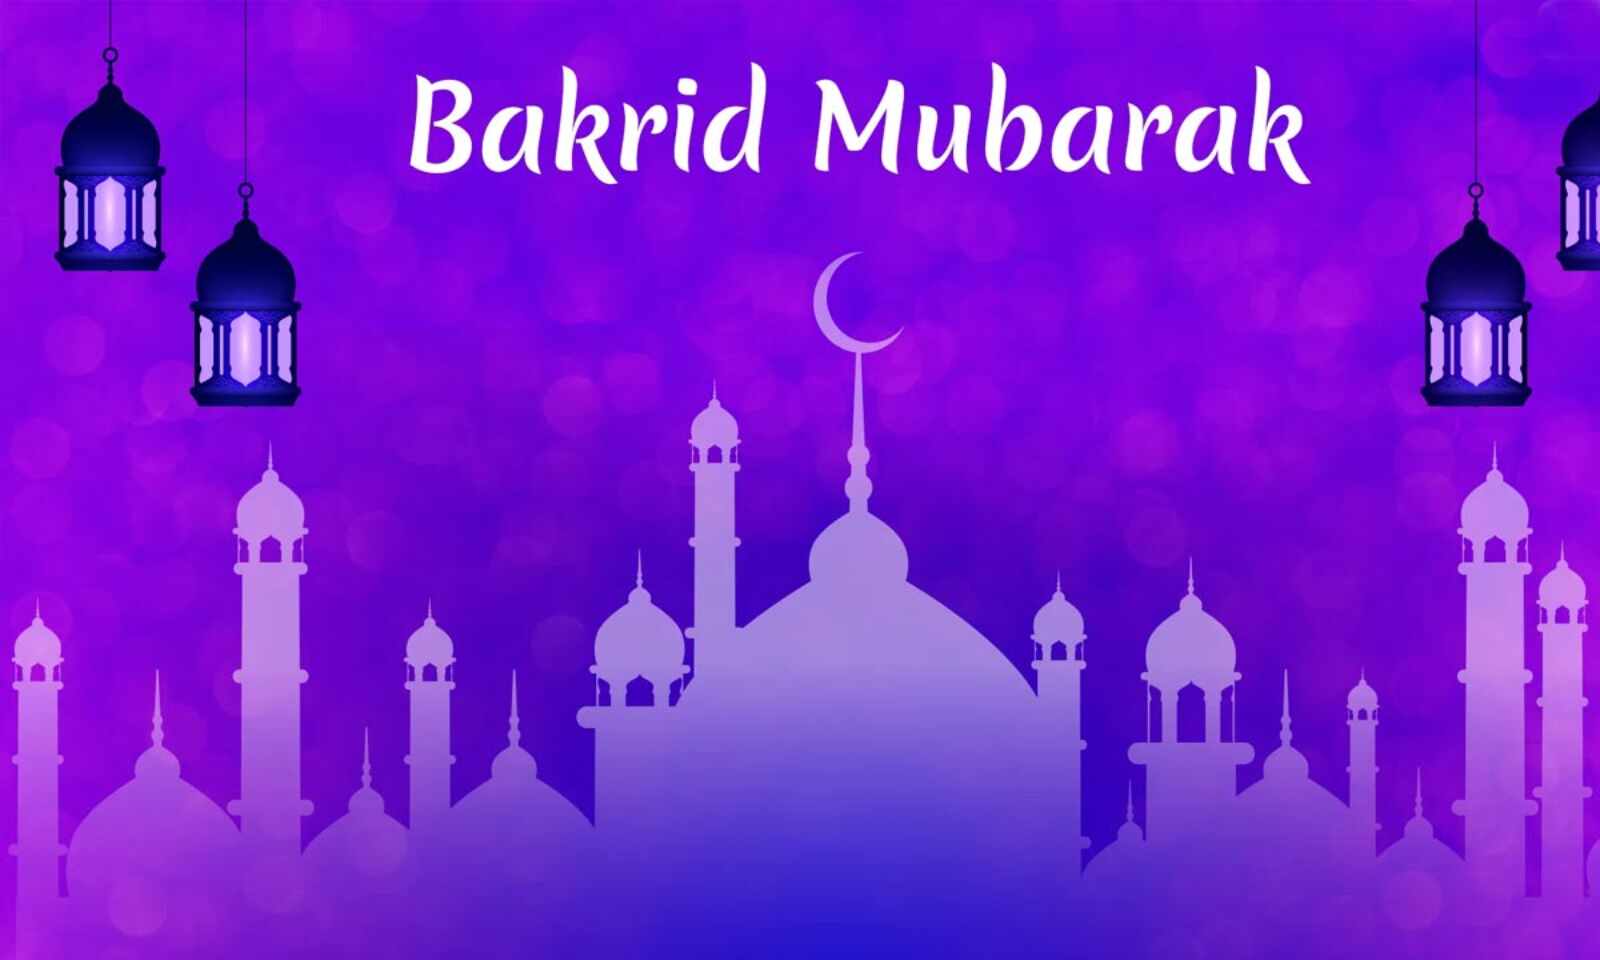 Kerala state government declared twoday holiday for Bakrid celebration